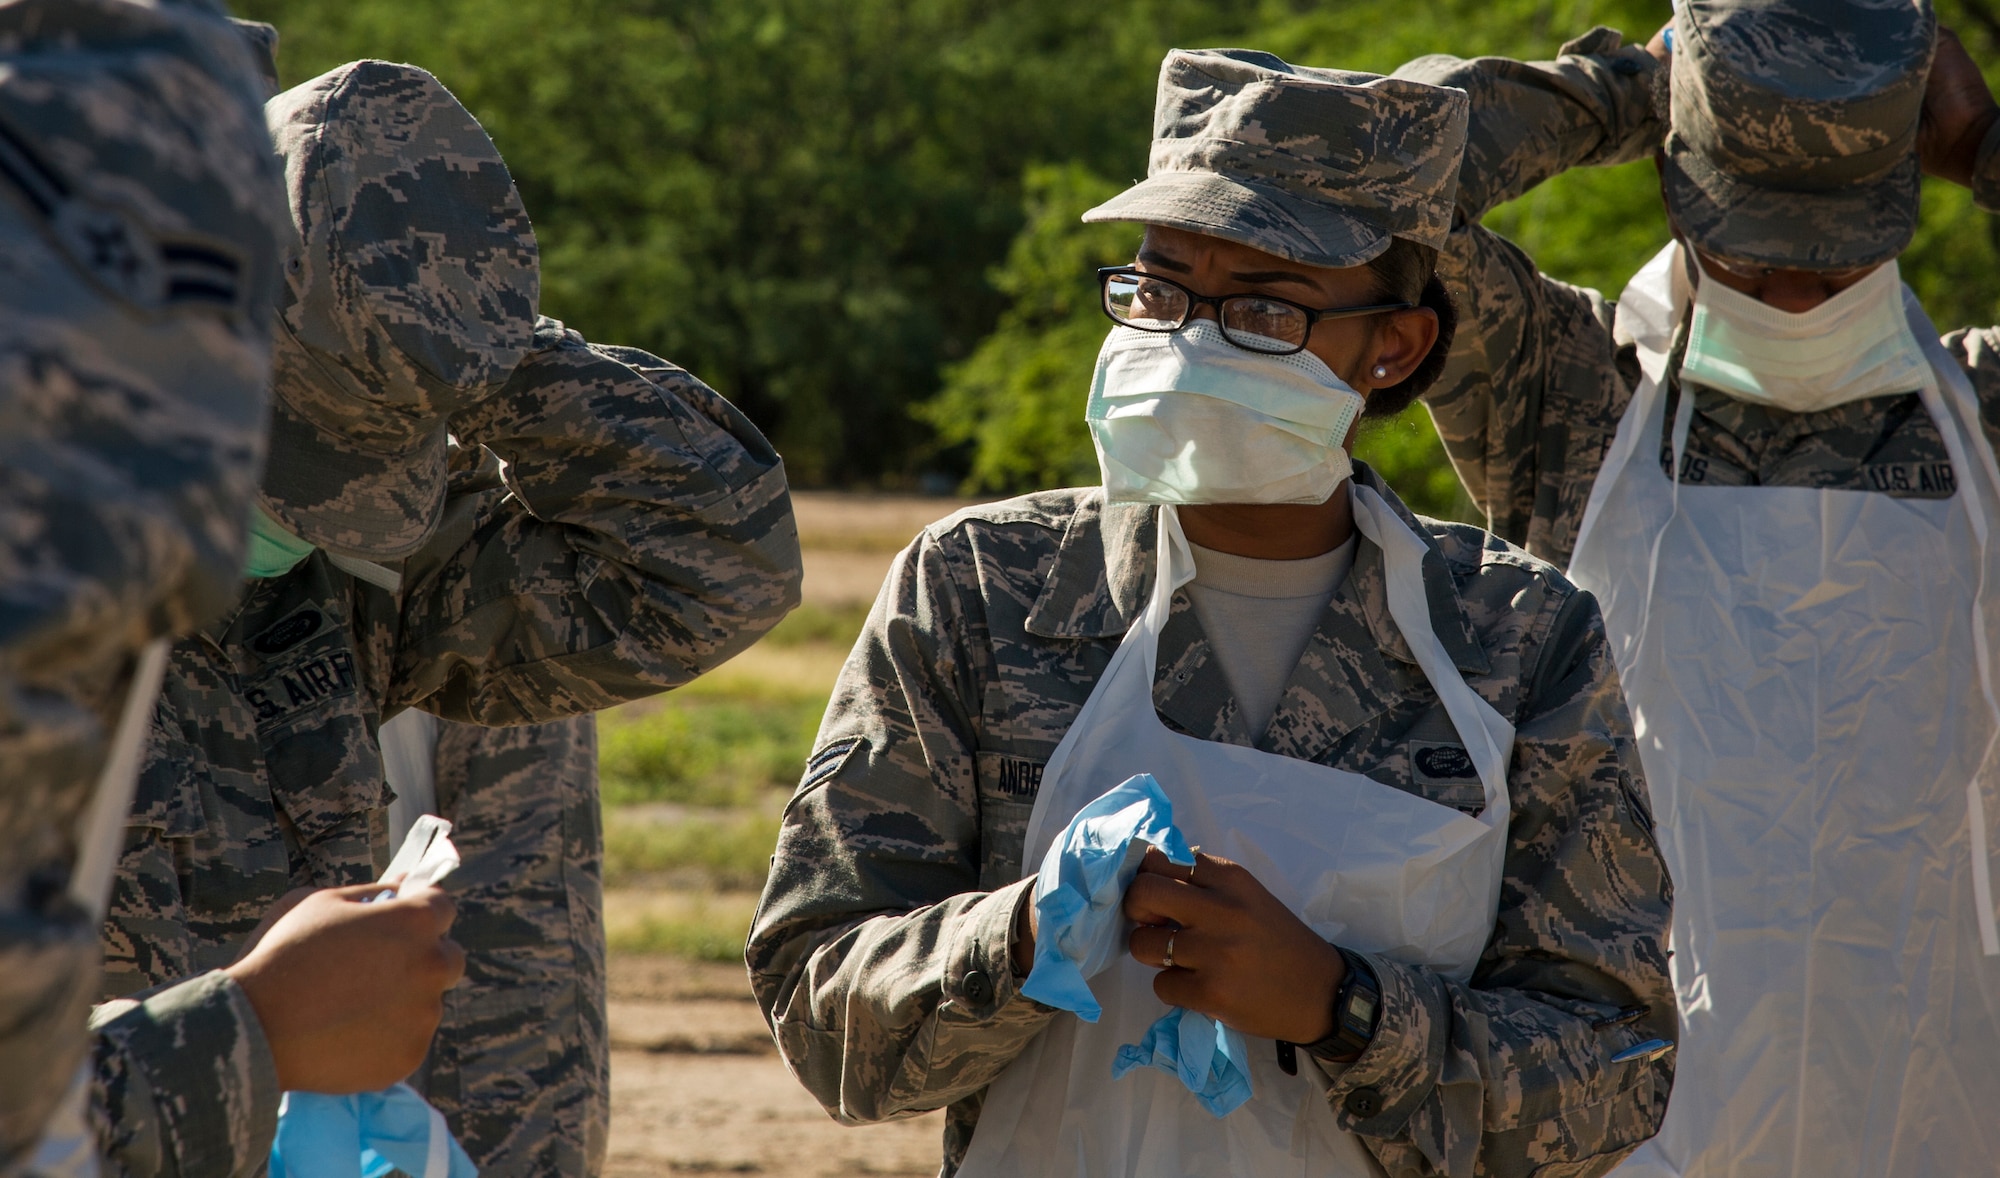 Airman 1st Class Asia Andrews, 647th Force Support Squadron search and recovery team member, dons her personal protective equipment during the search and recovery team’s training event on Joint Base Pearl Harbor-Hickam, Hawaii, Oct. 27, 2017. The search and recovery team is tasked with recovering human remains from accident sites. (U.S. Air Force photo by Tech. Sgt. Heather Redman)